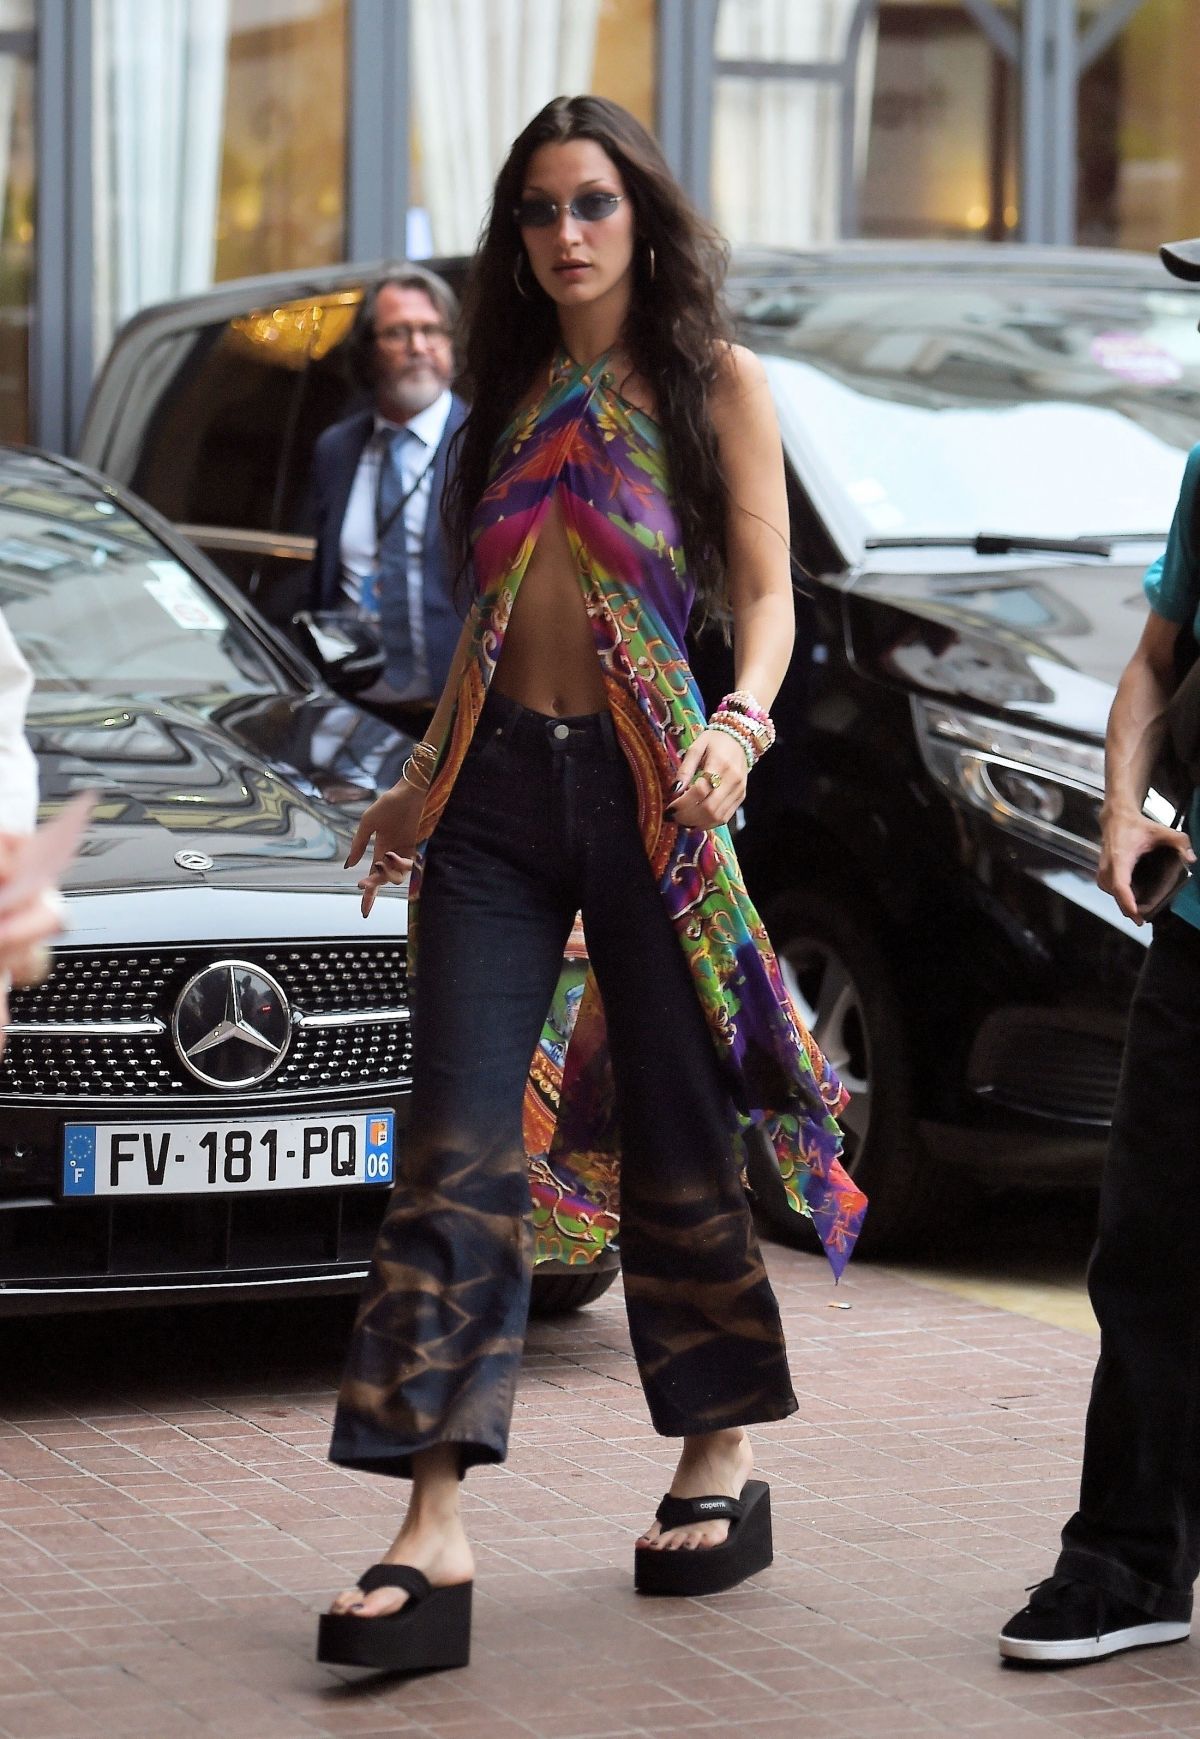 bella-hadid-arrives-at-her-hotel-in-cannes-07-12-2021-5.jpg